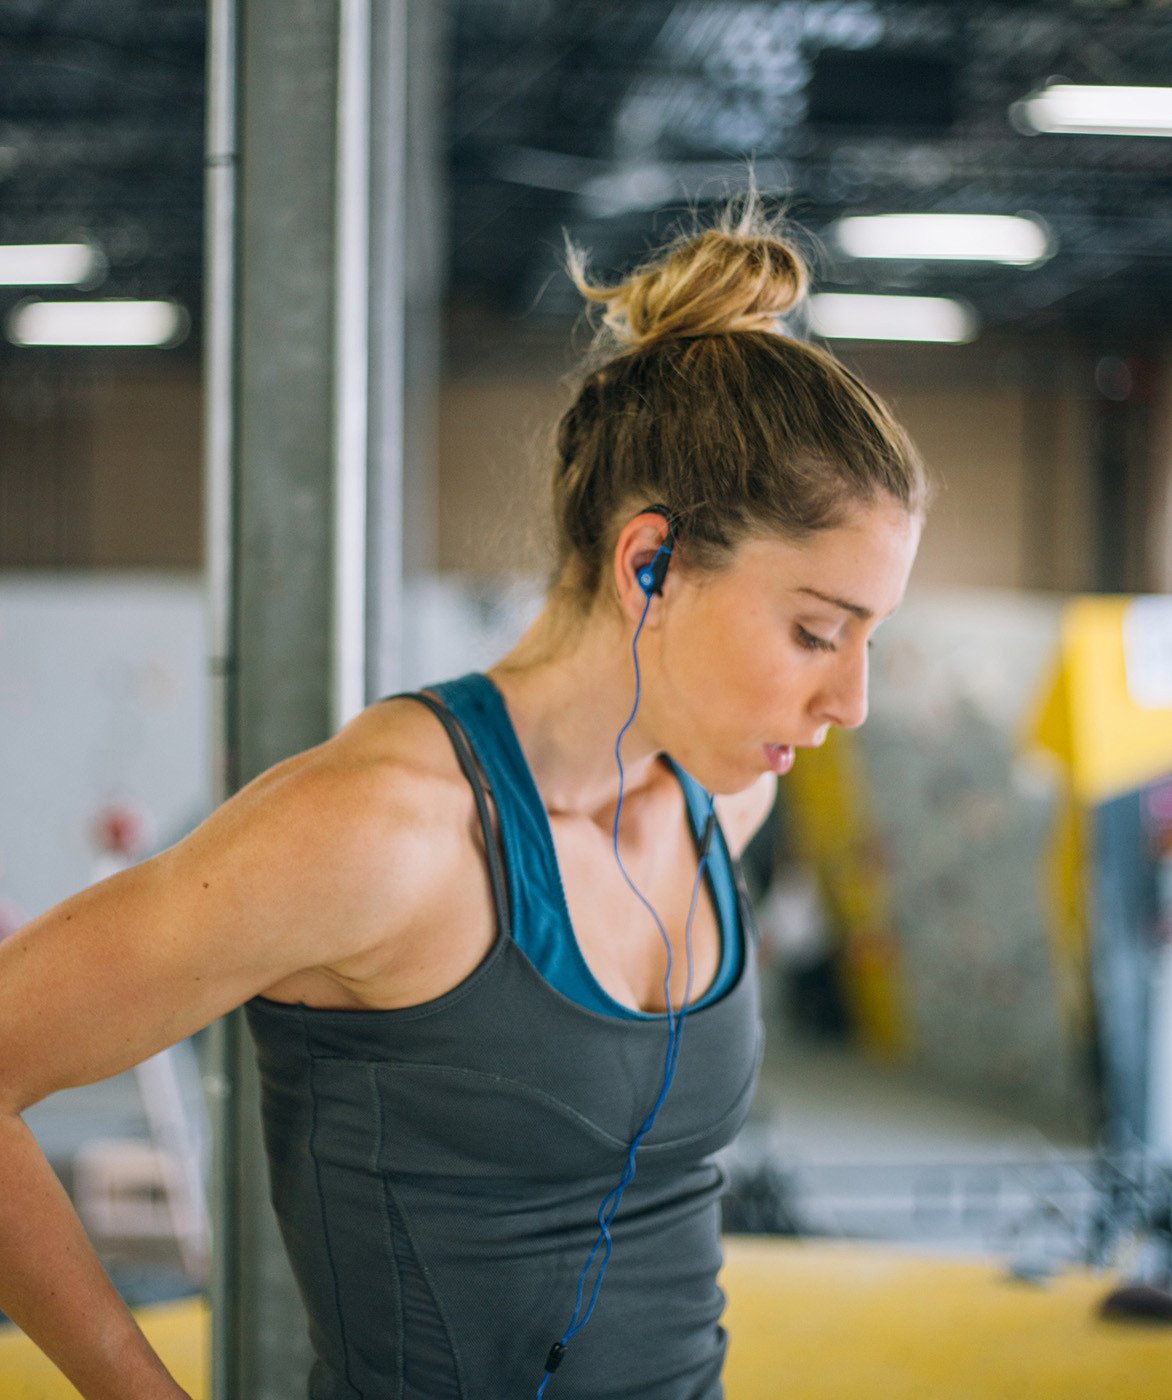 Woman at gym wearing earbuds